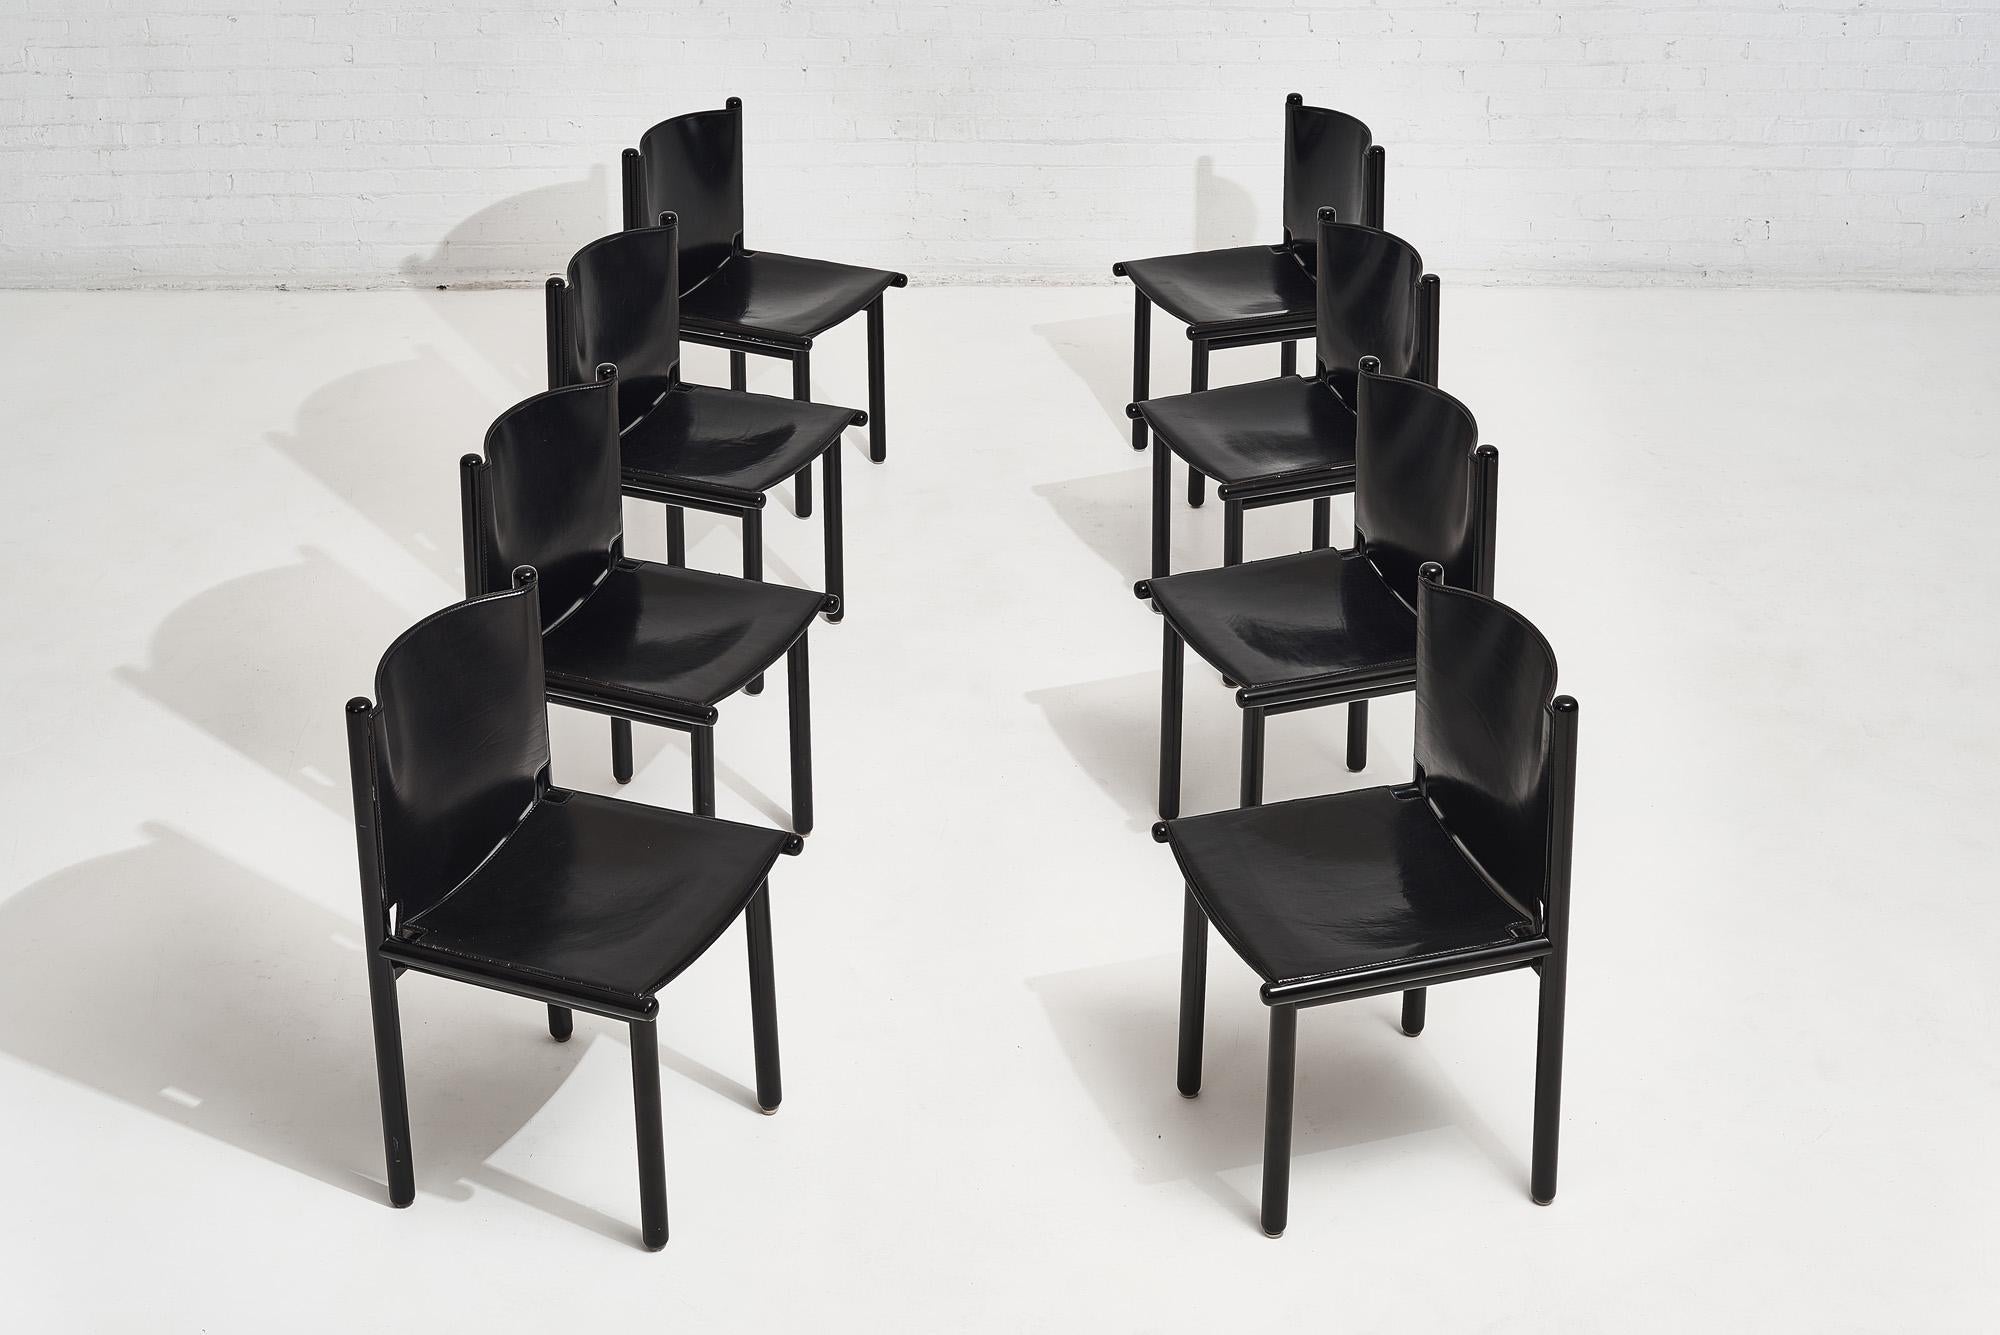 Caprile dining chairs by Gianfranco Frattini for Cassina, 1980’s. Set of 8, made of steel and leather. Original condition.